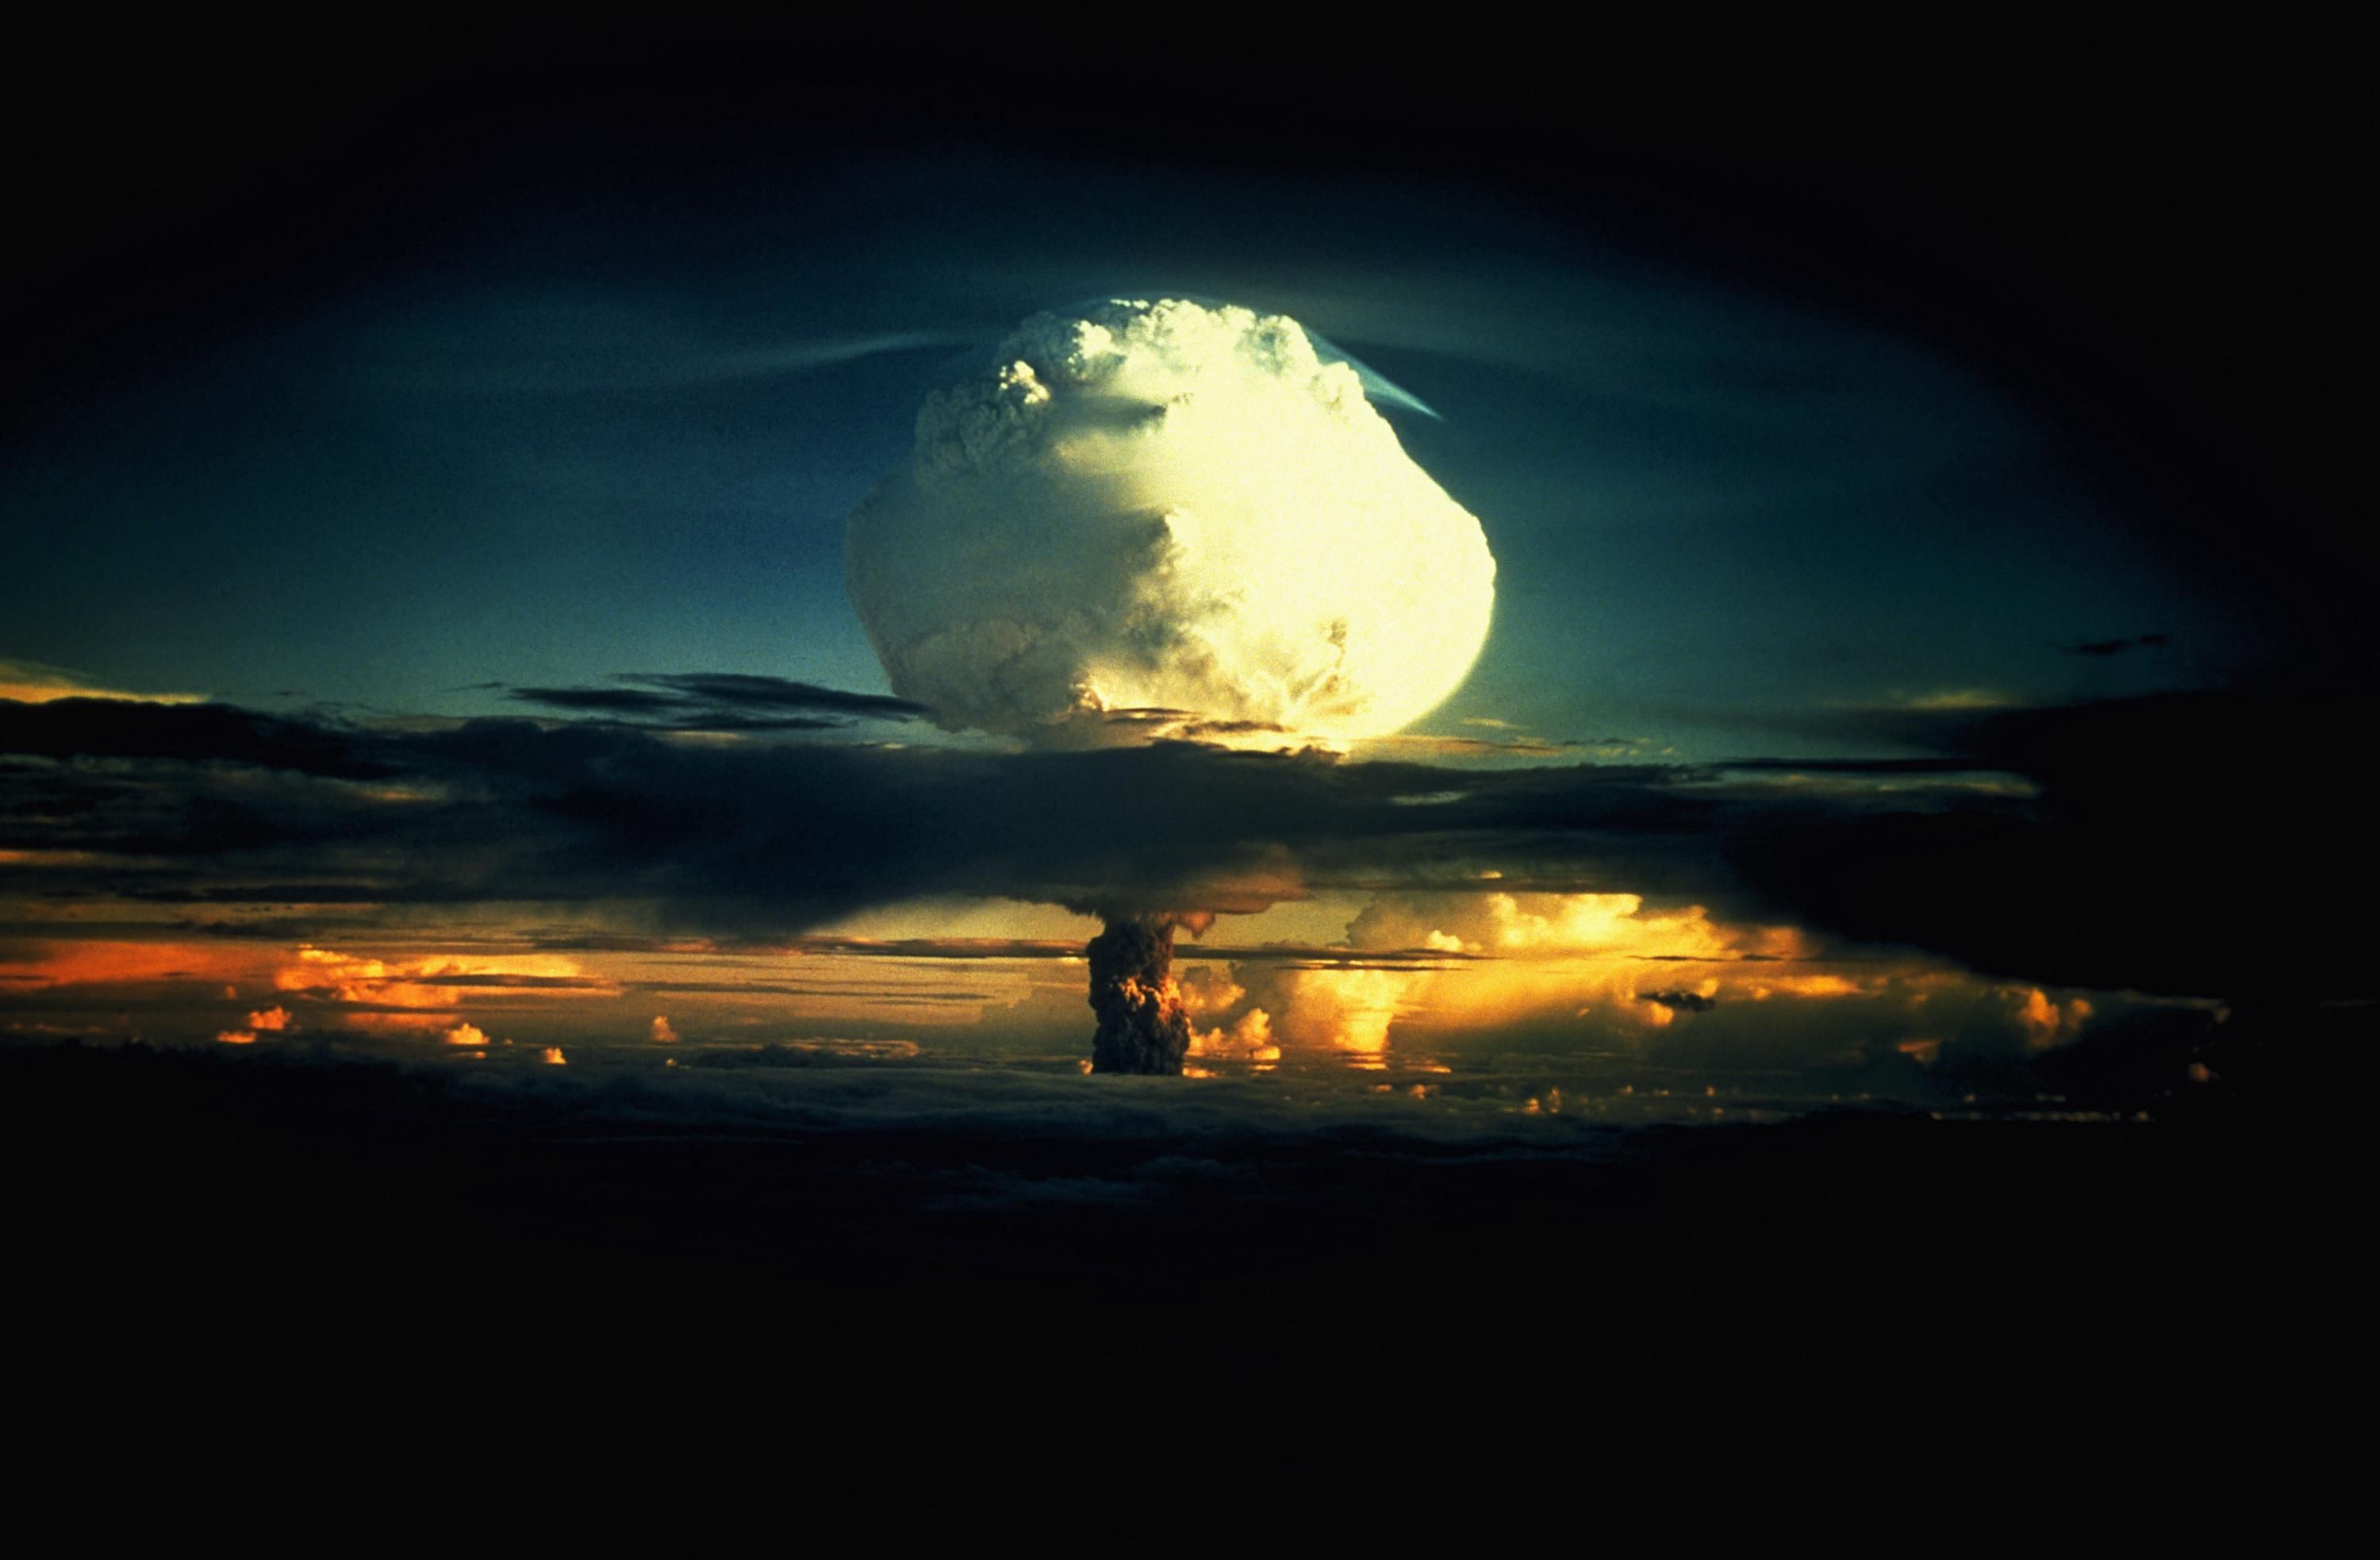 A billowing white mushroom cloud, mottled with orange, pushes through a layer of clouds during Operation Ivy, the first test of a hydrogen bomb, at Enewetak Atoll in the Marshall Islands. (Photo by © CORBIS/Corbis via Getty Images)